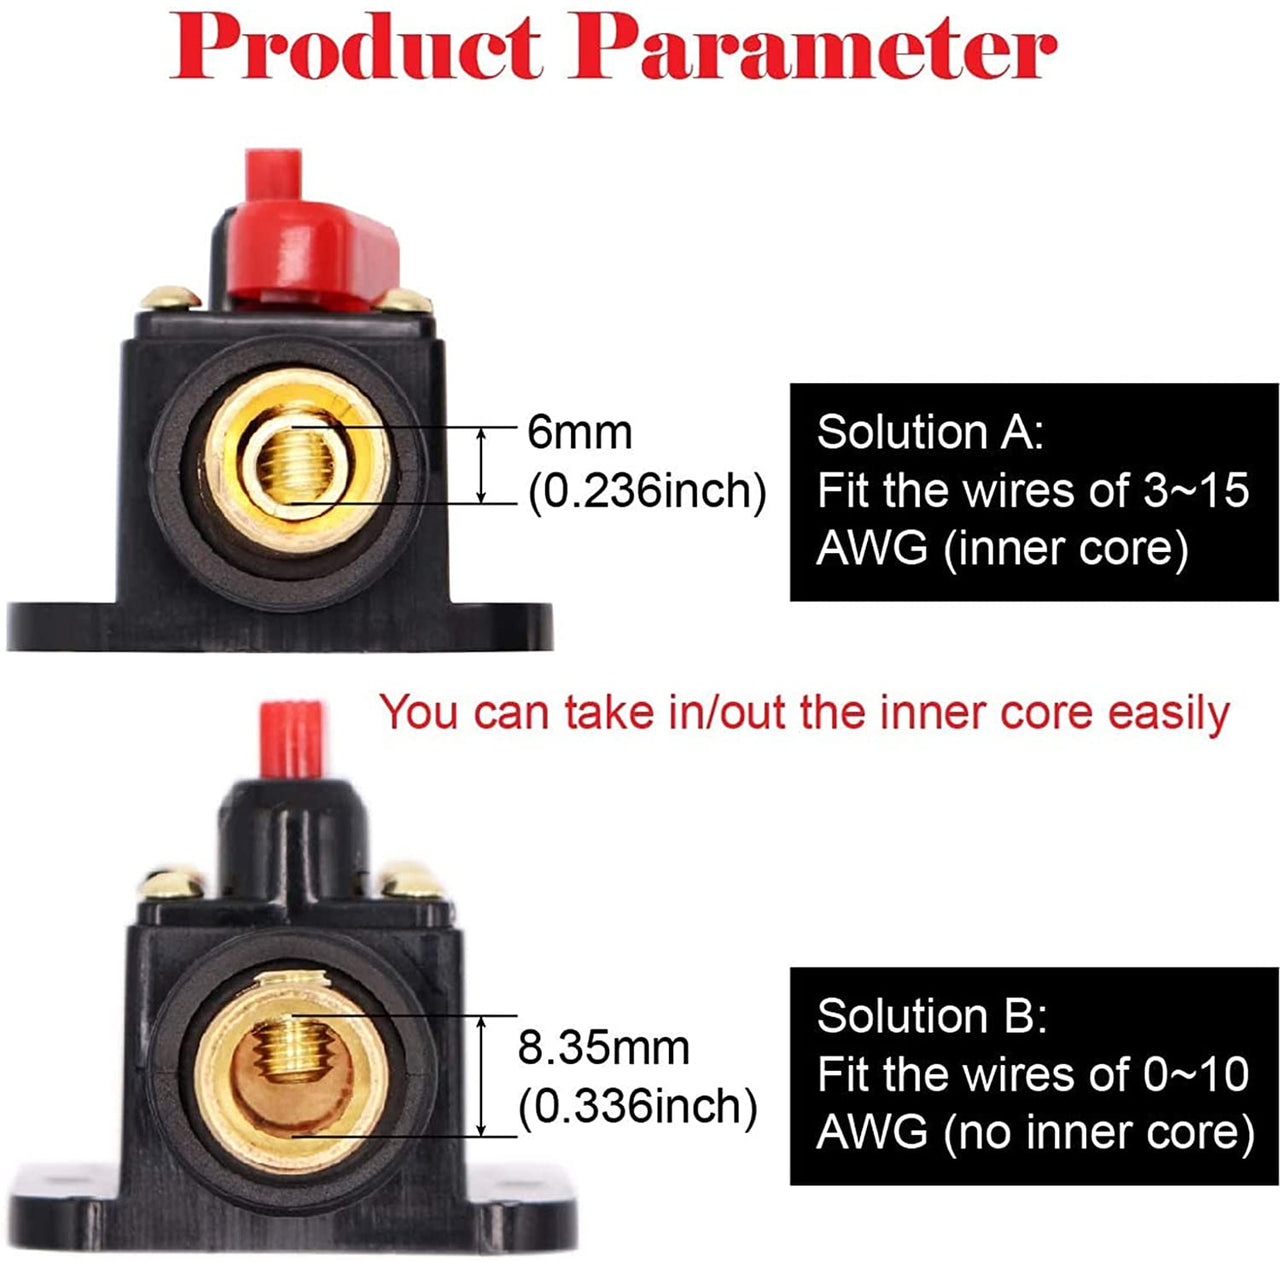 2 Absolute ICB60 4/8 AWG 60 Amp in-line Circuit Breaker with Manual Reset with Manual Reset Car Auto Marine Boat Stereo